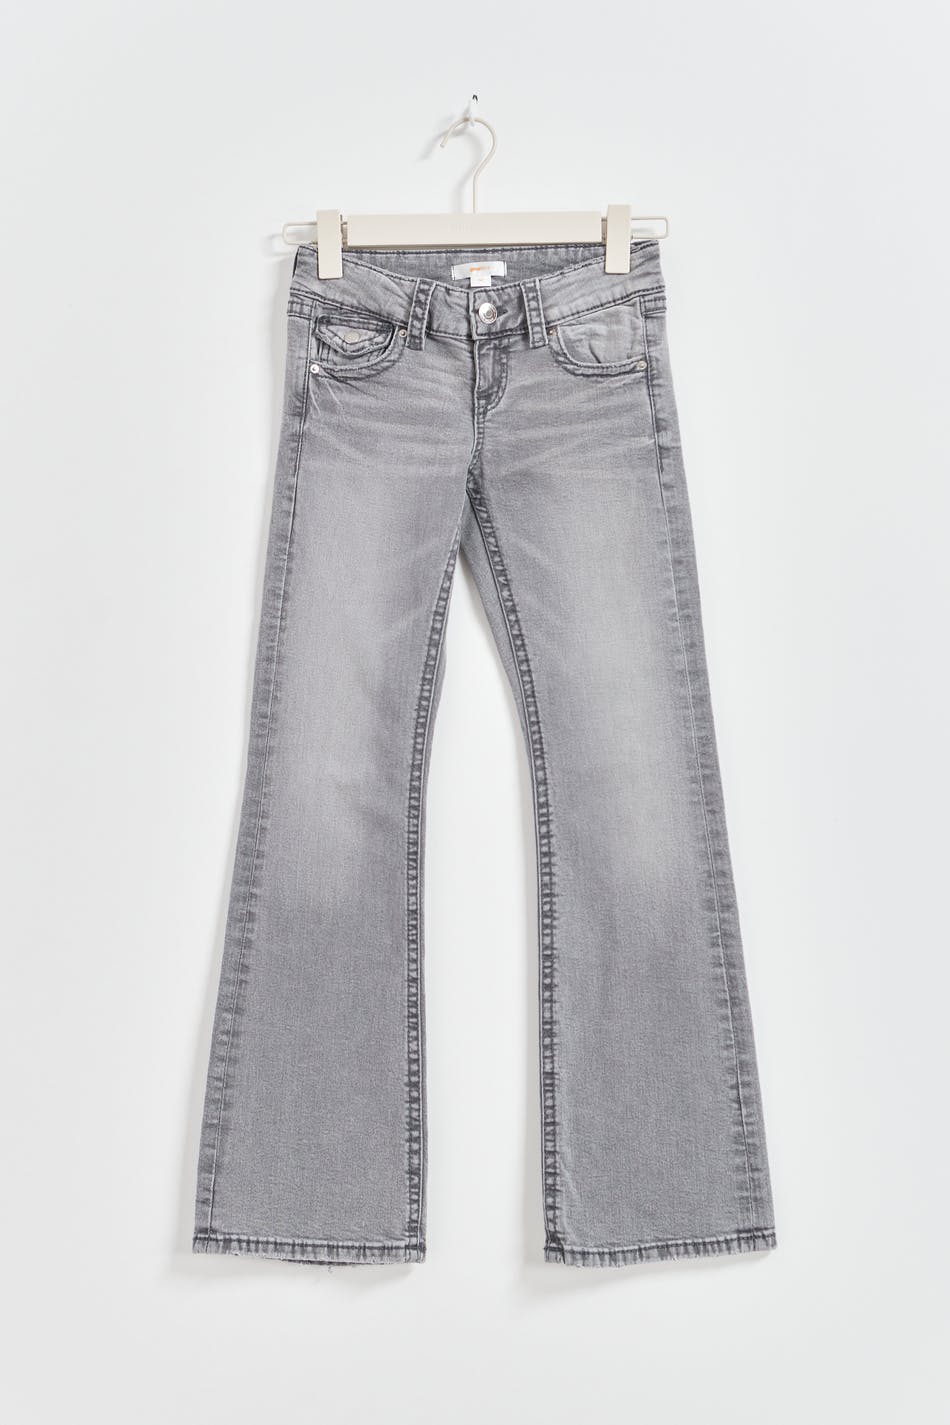 Gina Tricot - Chunky low flare jeans - wide jeans - Grey - 170 - Female